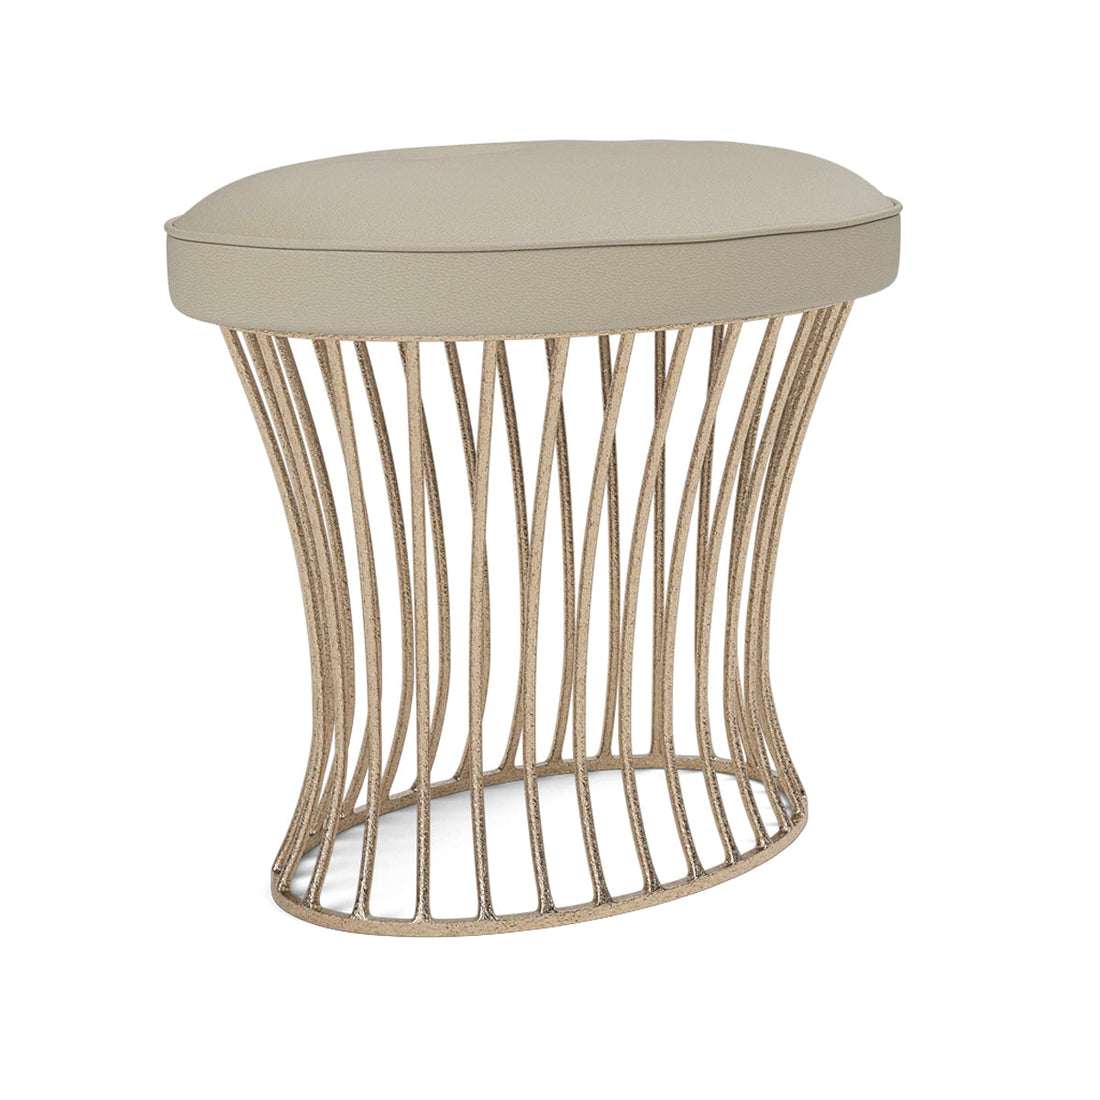 Made Goods Roderic Oval Stool in Garonne Marine Leather